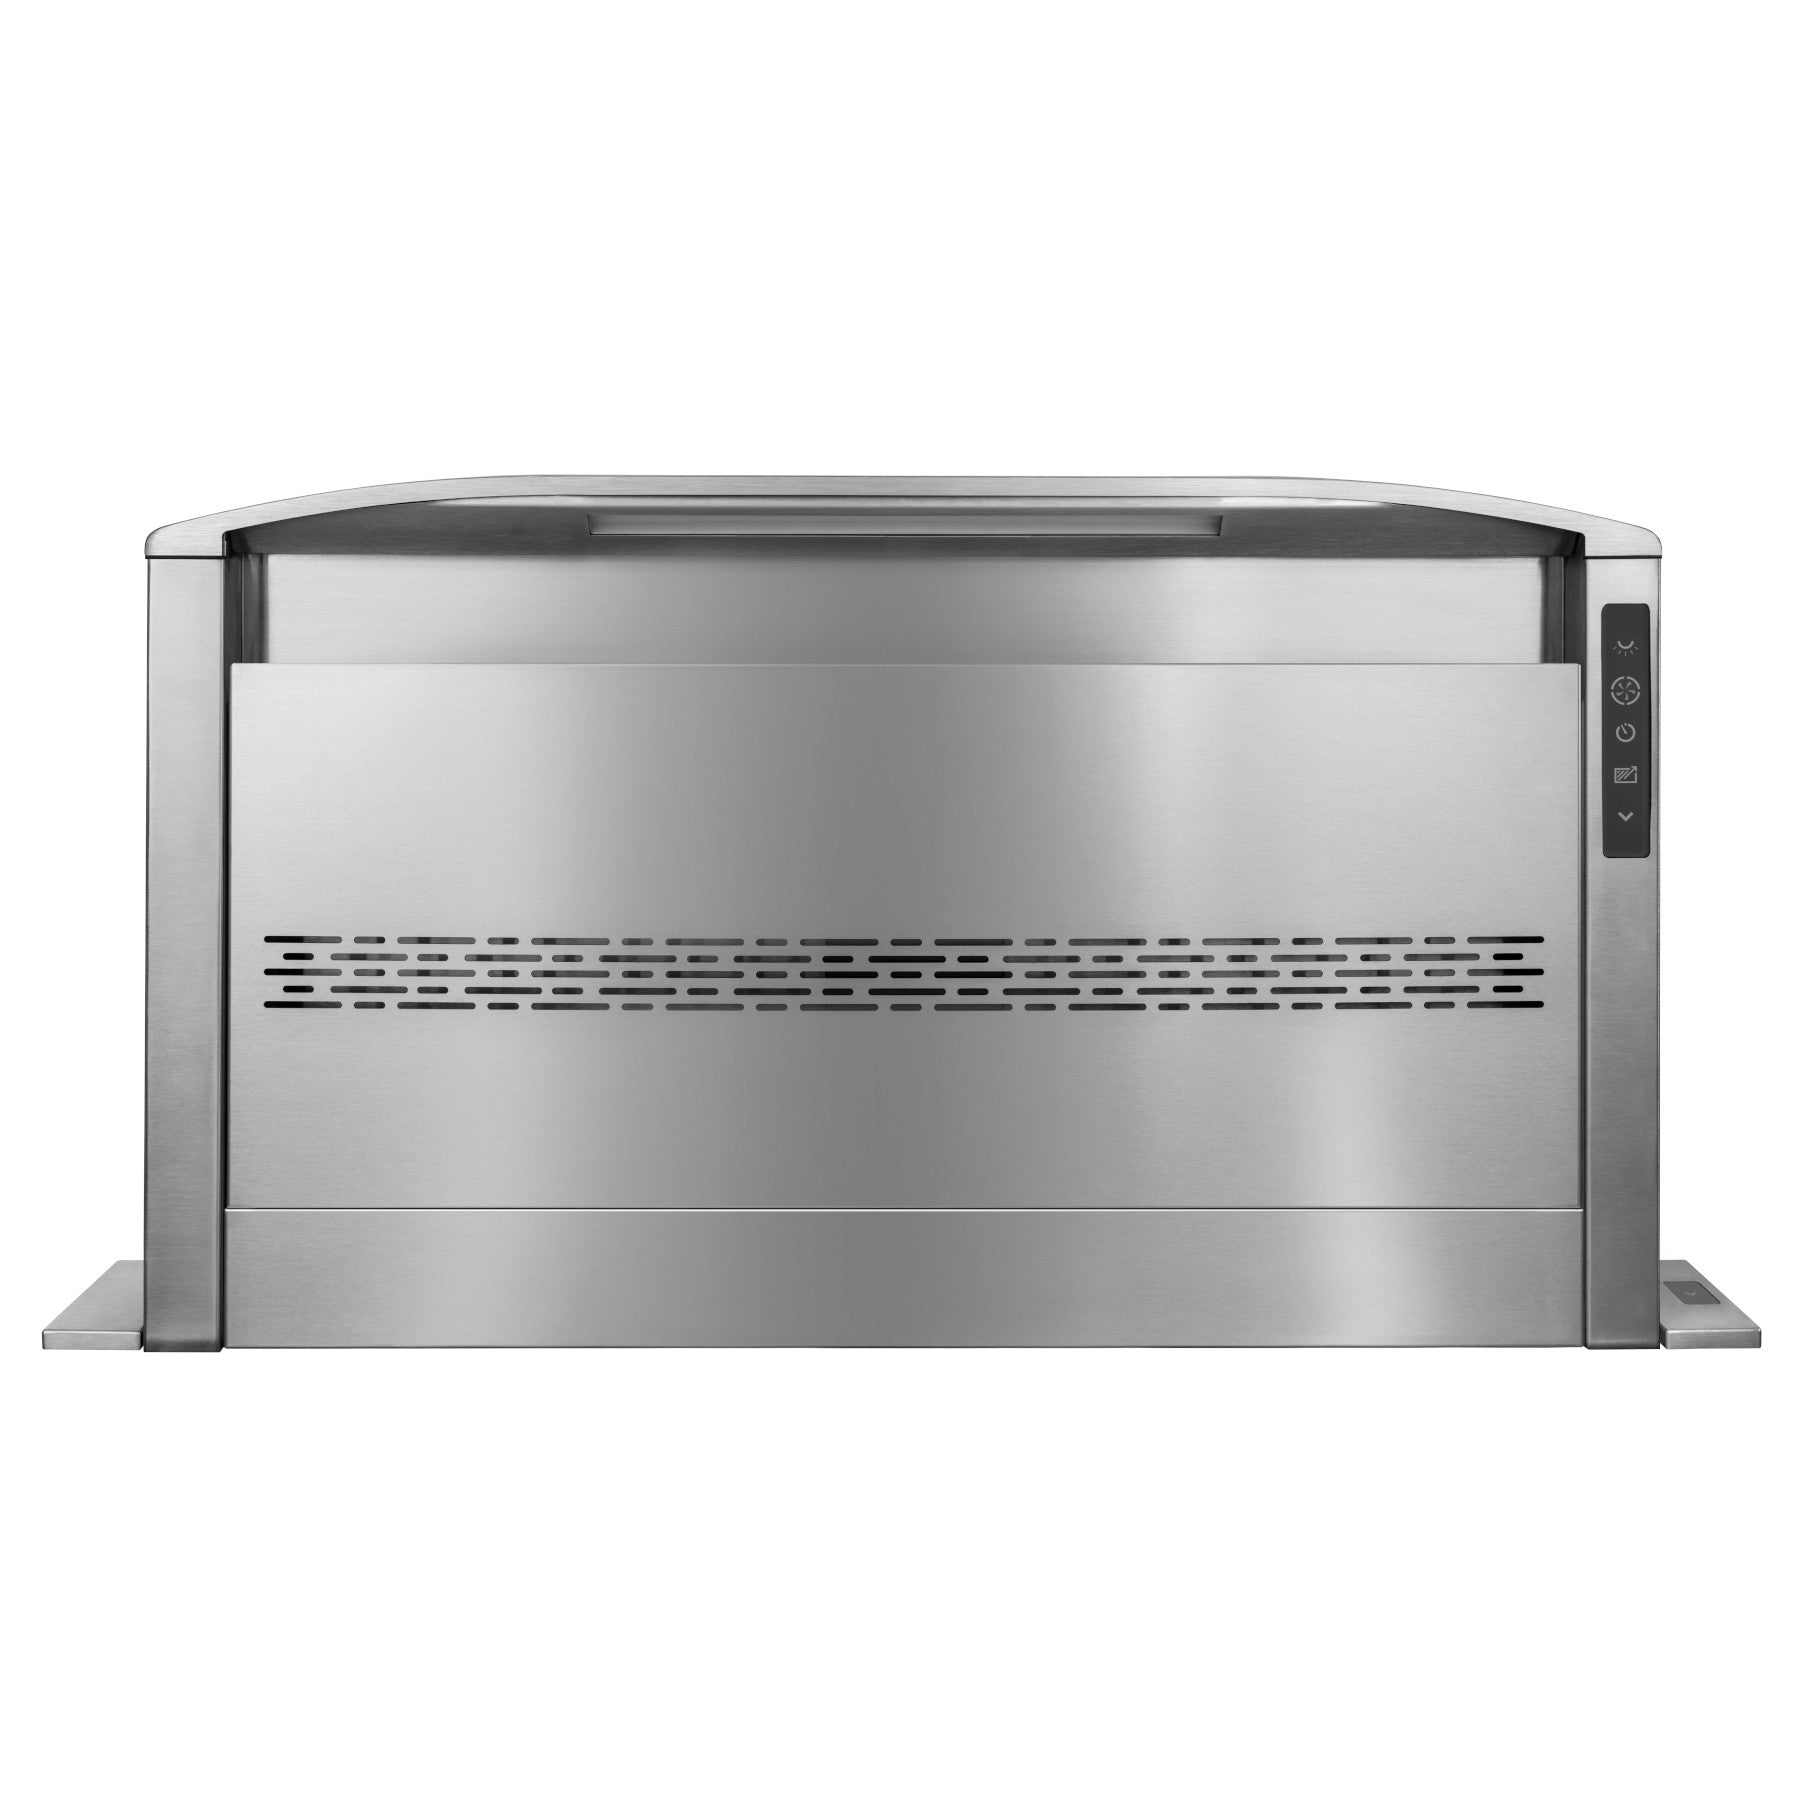 Best - 48 Inch Downdraft Vent in Stainless - D49M48SB